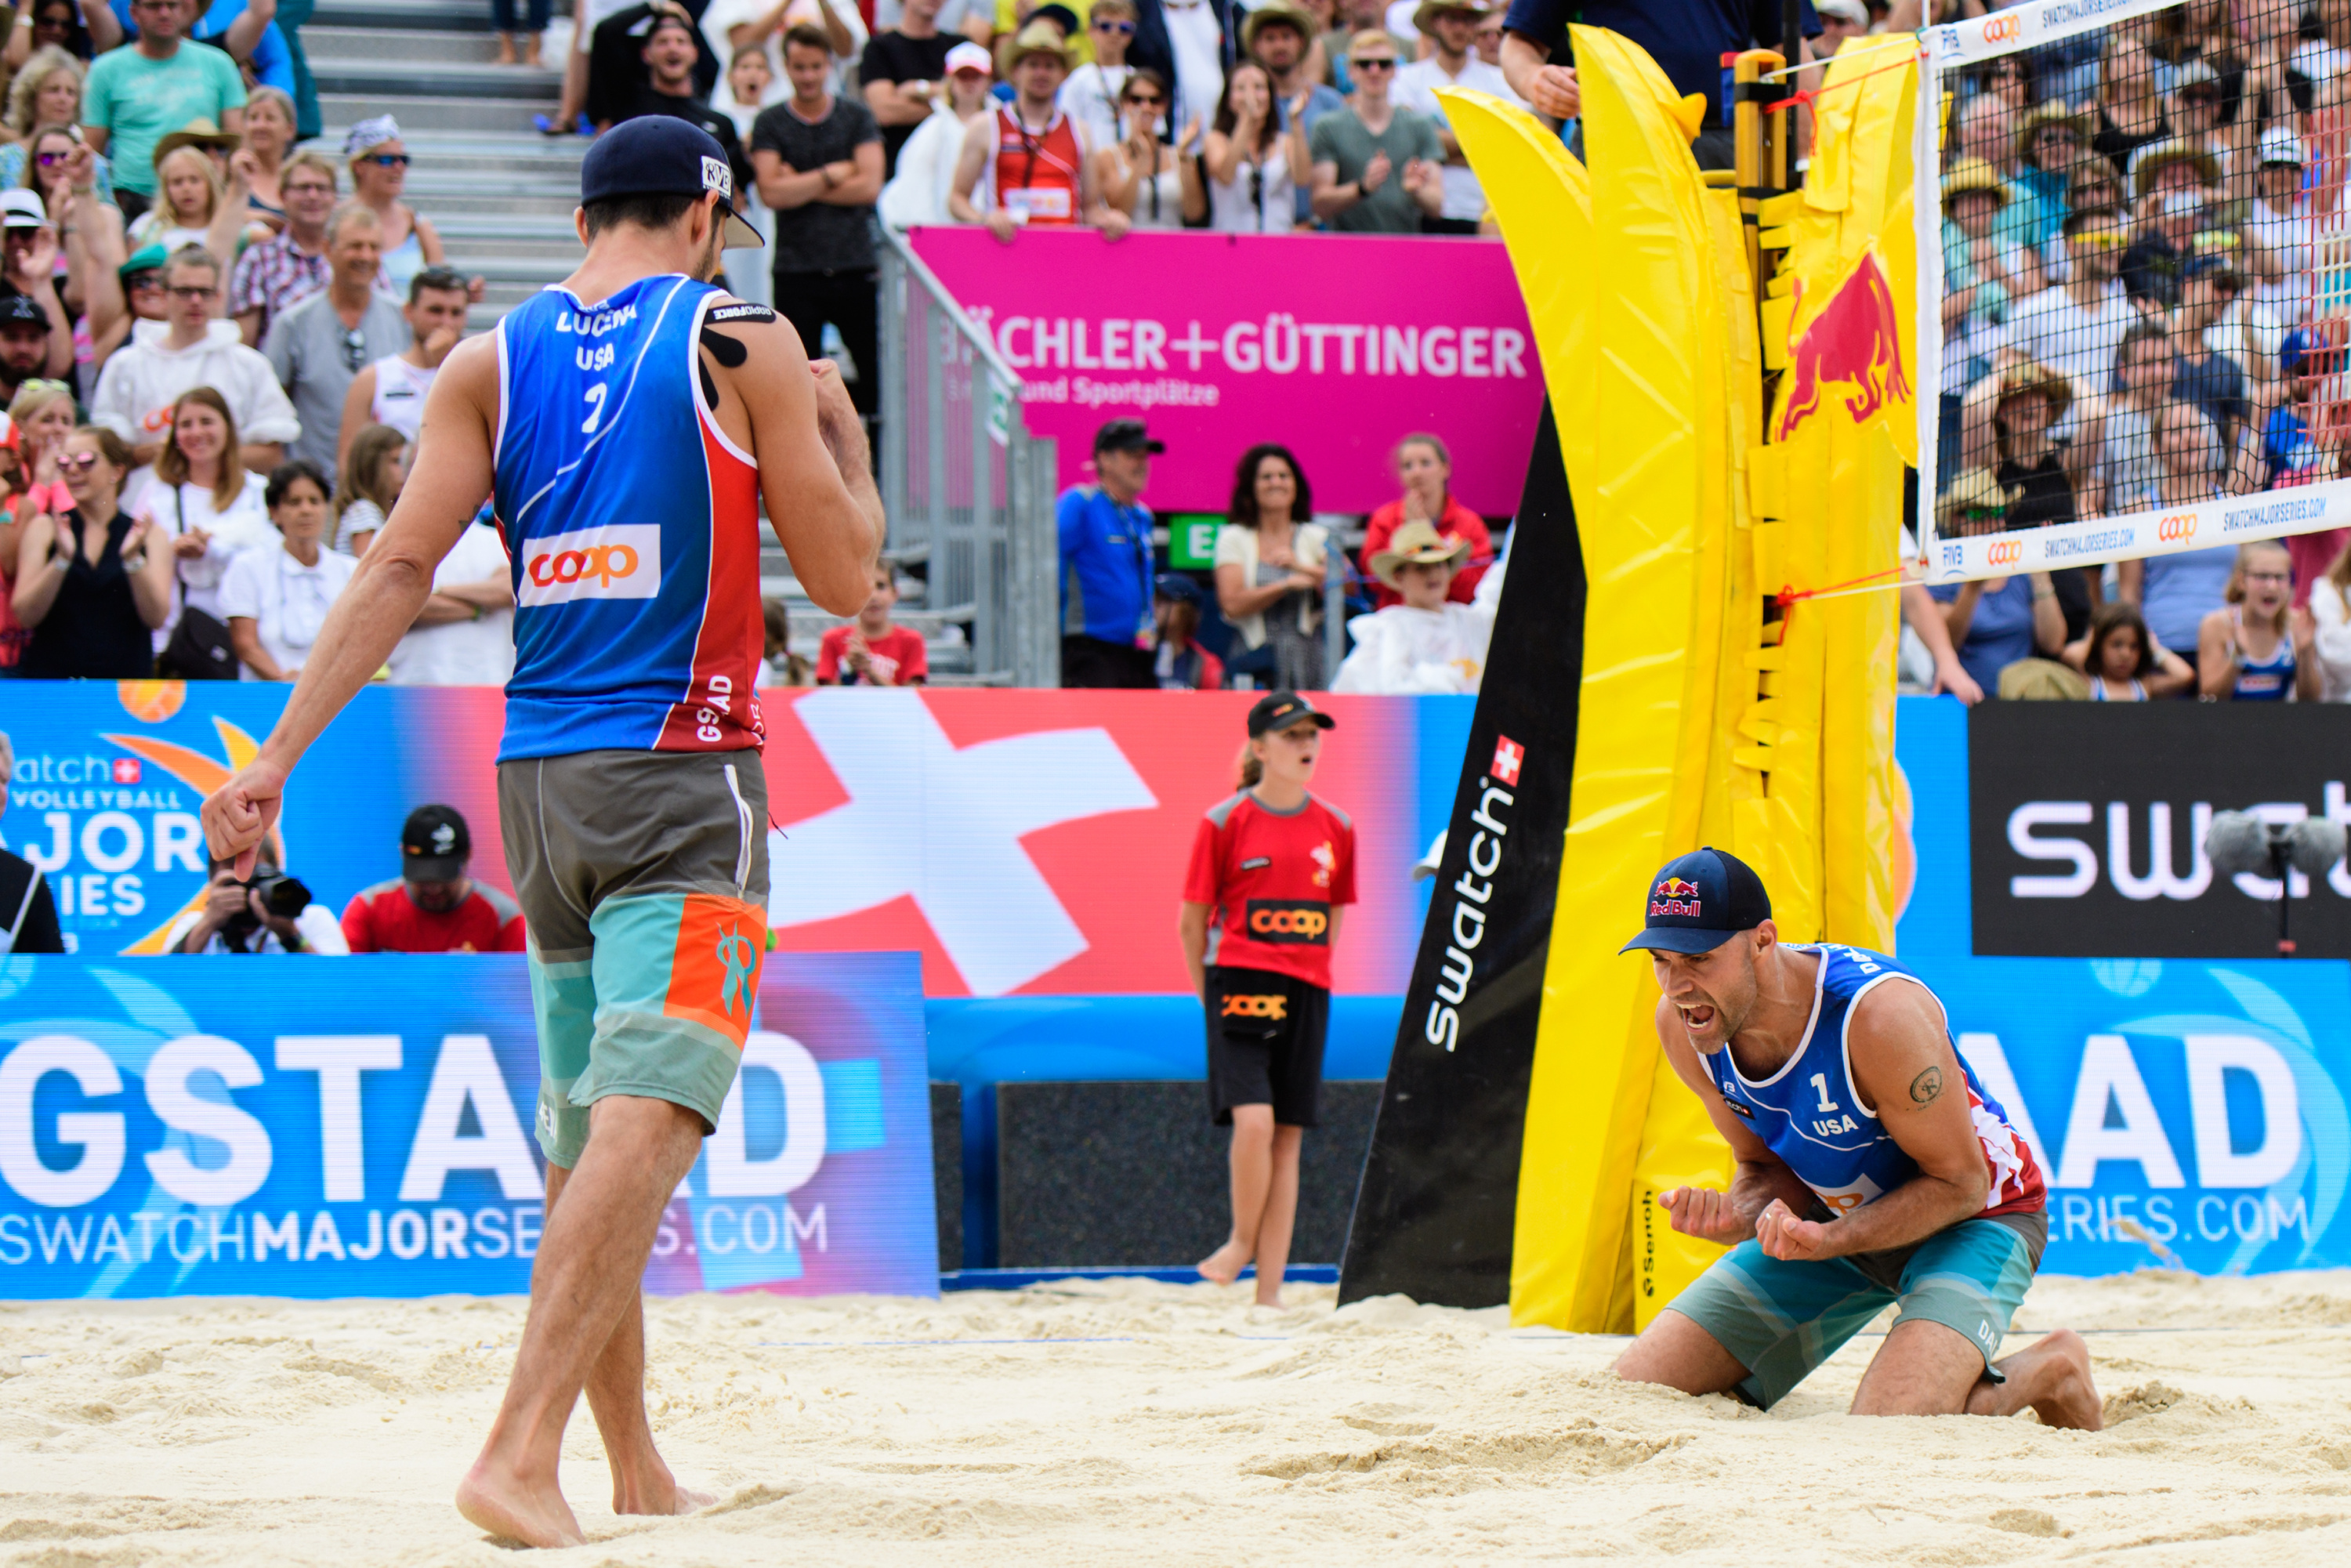 Nick Lucena (left) and Phil Dalhausser (right) celebrate their Gold Medal victory at the FIVB World Tour Gstaad Major.